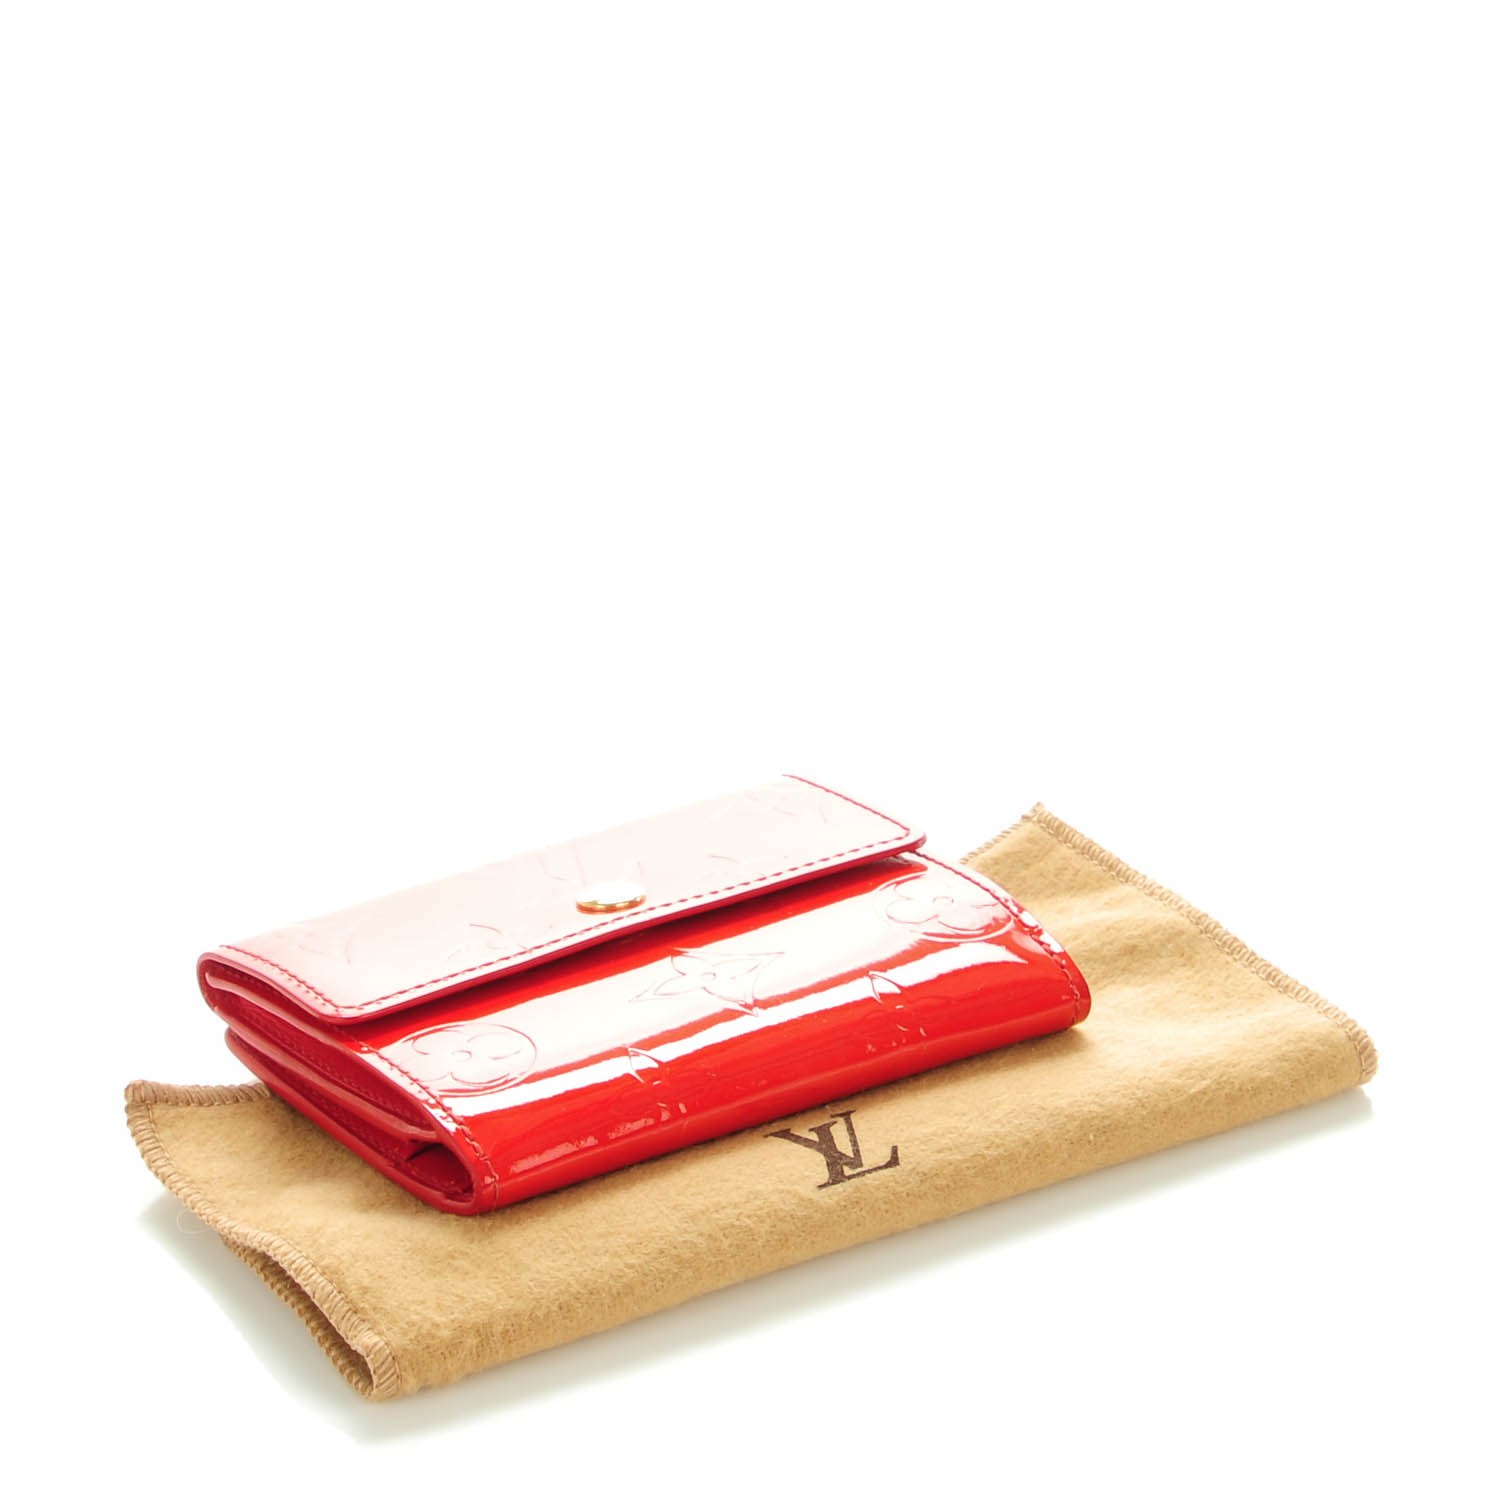 LOUIS VUITTON Vernis Ludlow Wallet Rouge Red 143446